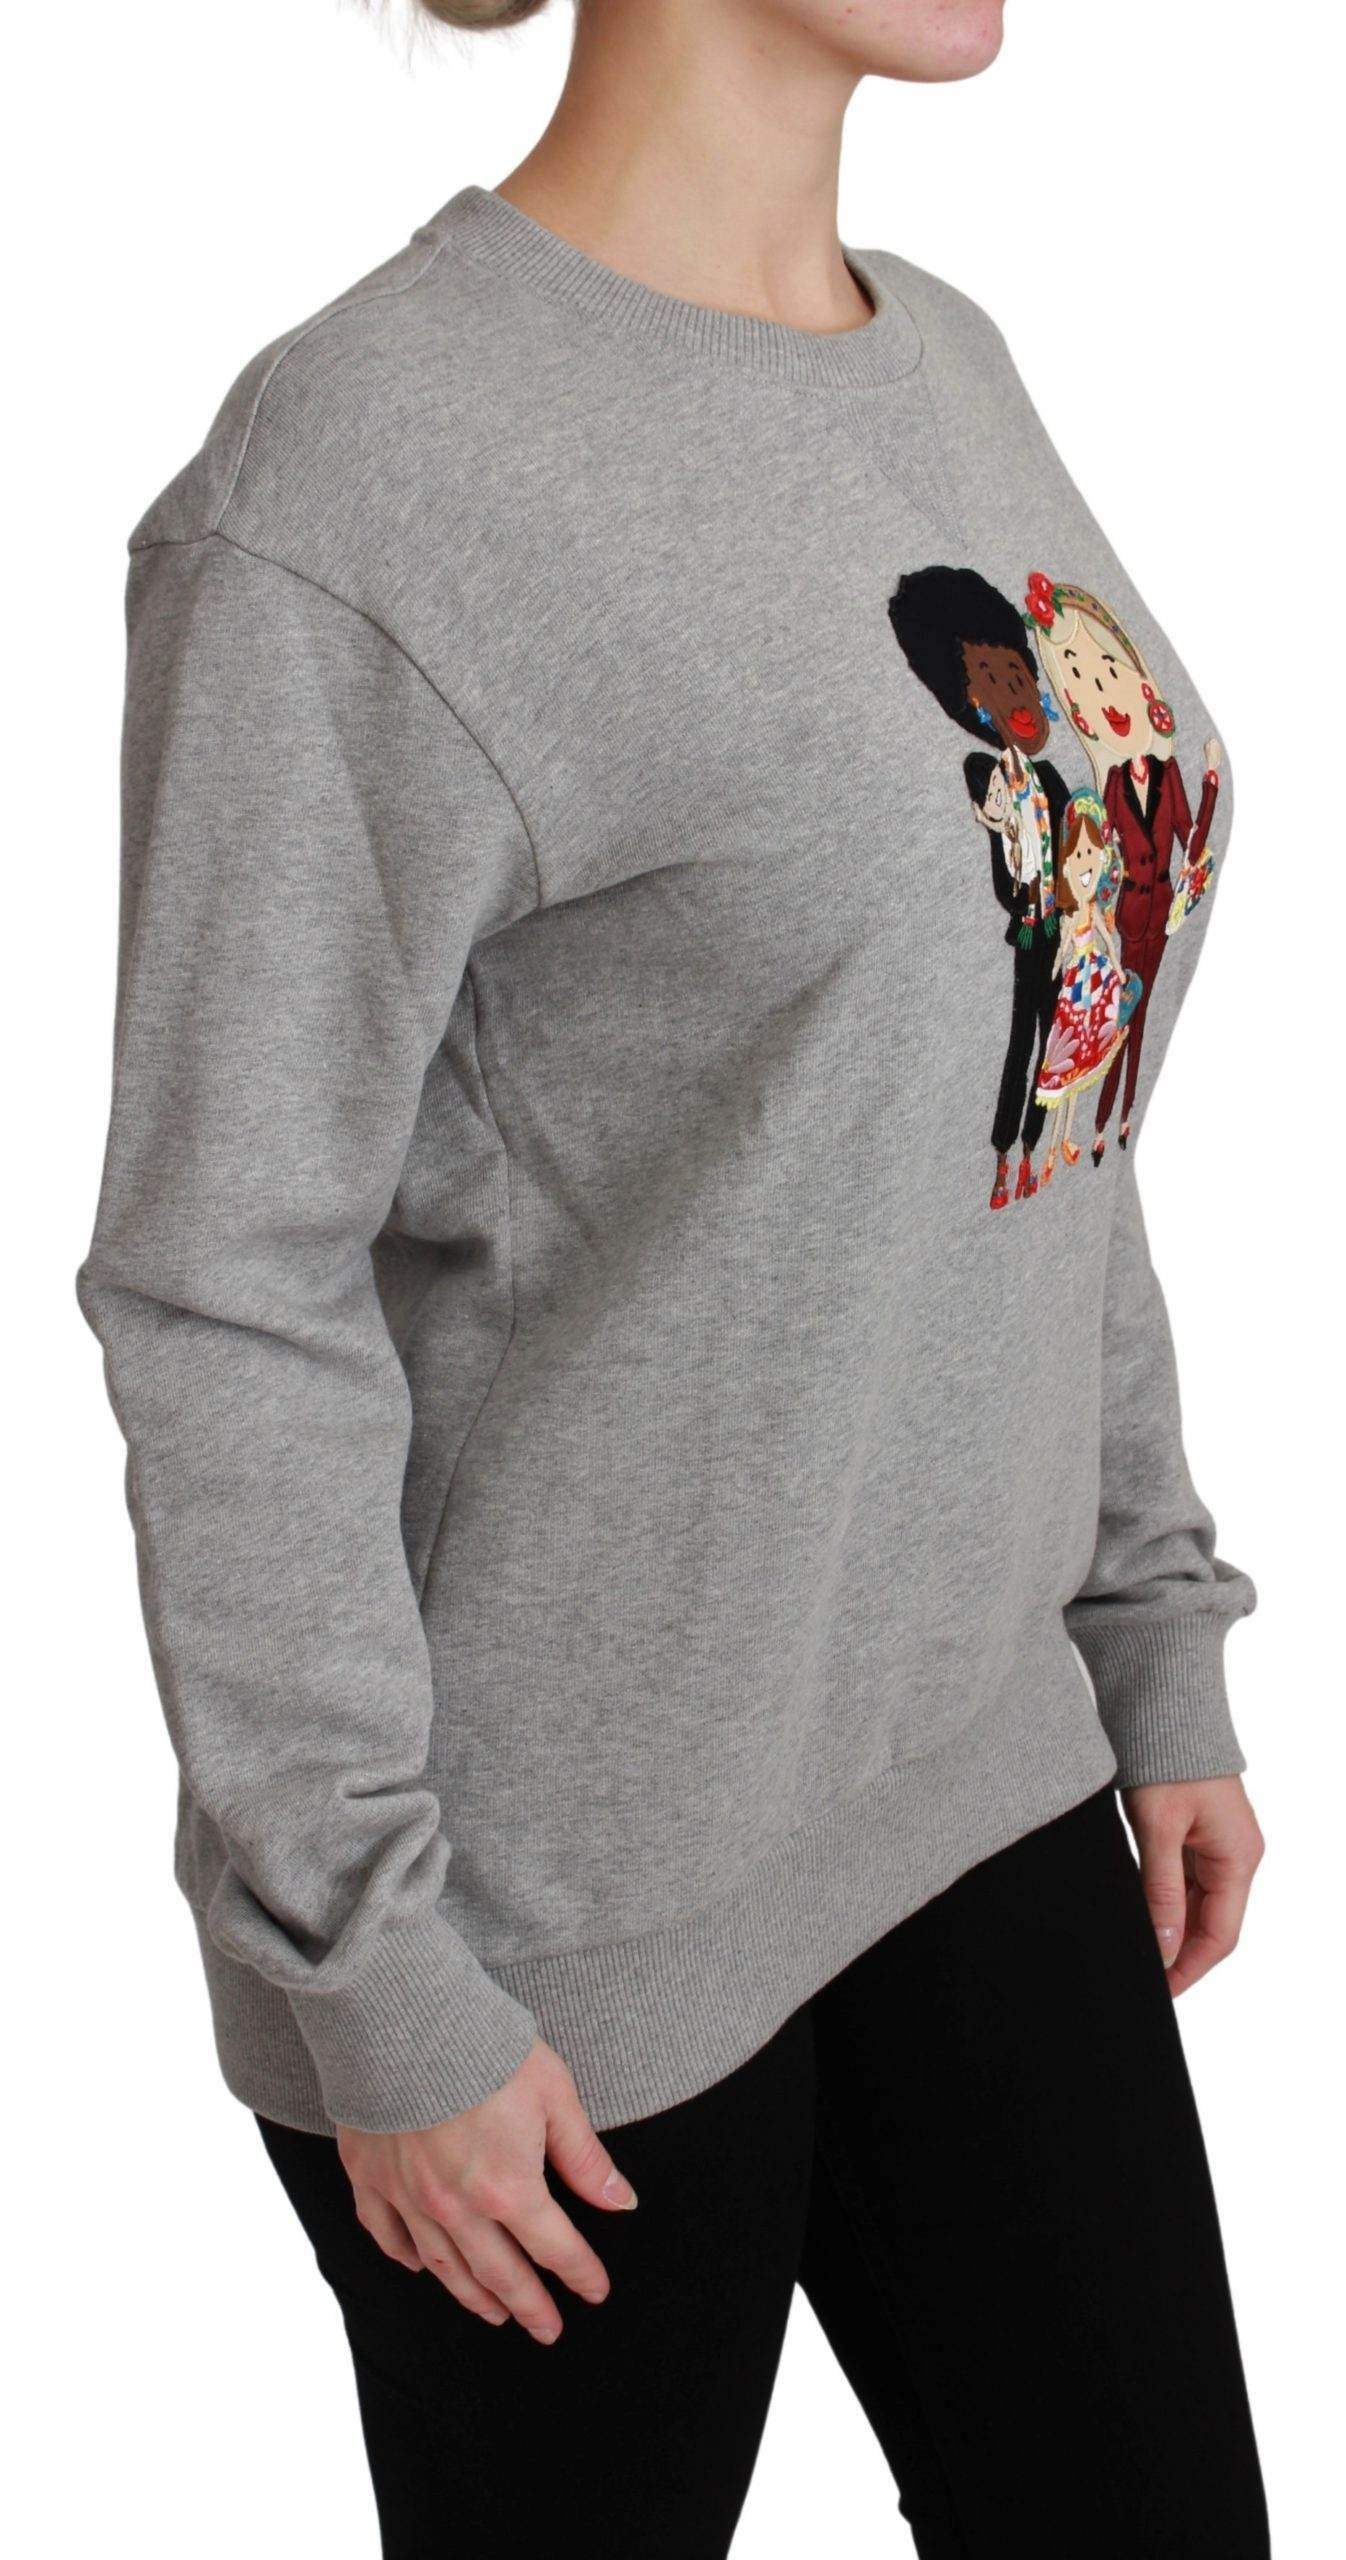 Dolce & Gabbana  Gray #dgfamily Cotton Pullover Sweater #women, Brand_Dolce & Gabbana, Catch, Dolce & Gabbana, feed-agegroup-adult, feed-color-gray, feed-gender-female, feed-size-IT40|S, feed-size-IT42|M, feed-size-IT44|L, feed-size-IT46|XL, Gender_Women, Gray, IT38|XS, IT40|S, IT42|M, IT44|L, IT46|XL, Kogan, Sweaters - Women - Clothing, Women - New Arrivals at SEYMAYKA